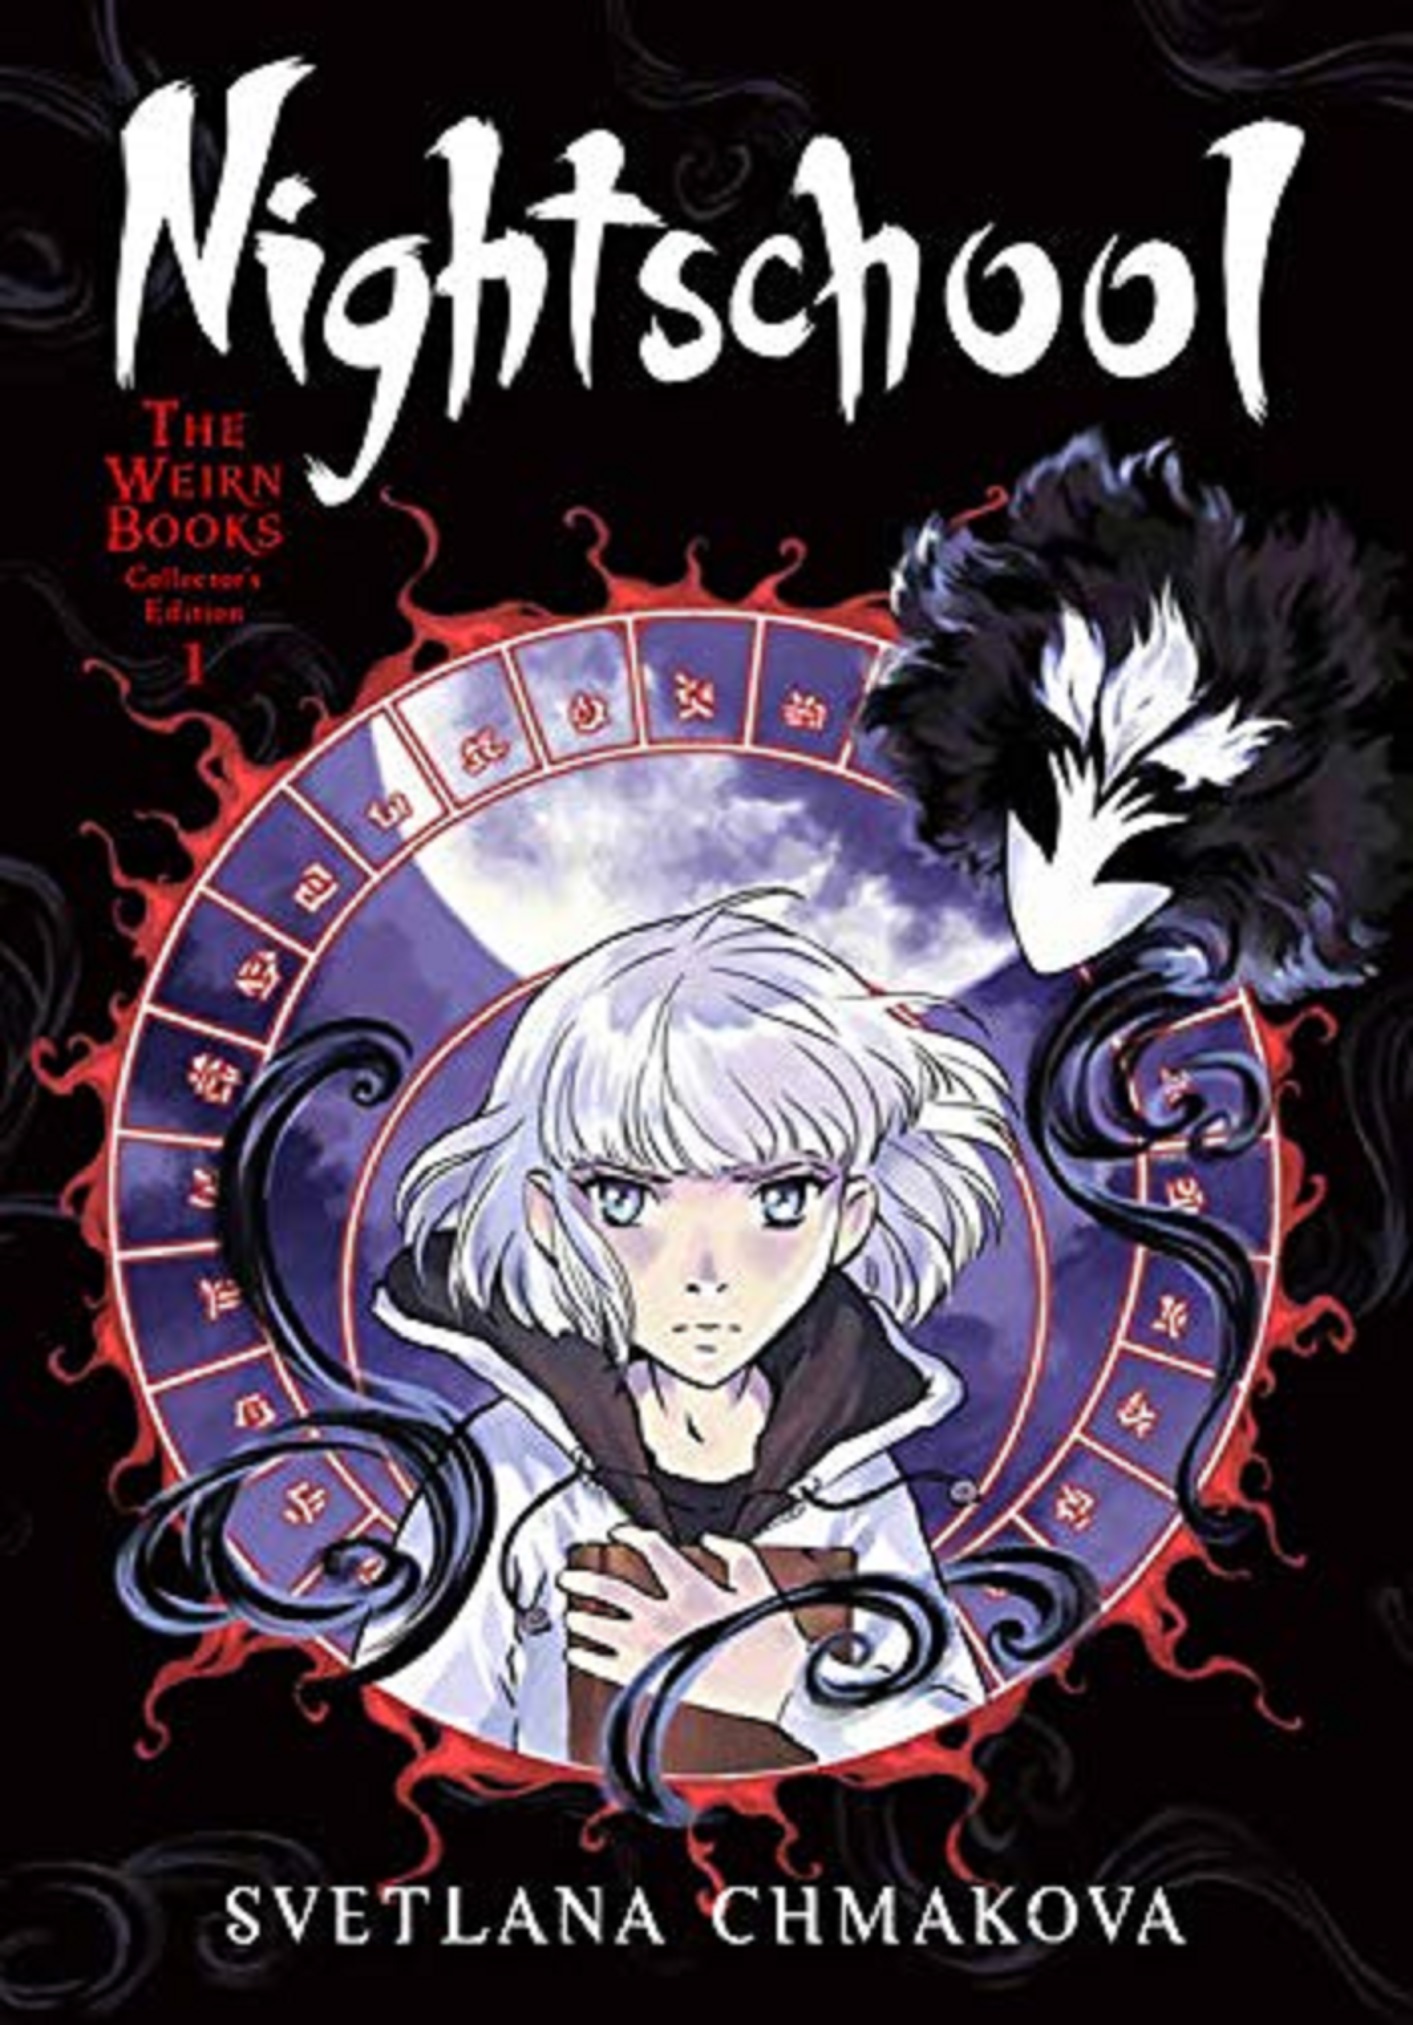 Nightschool: The Weirn Books Collector&#039;s Edition - Volume 1